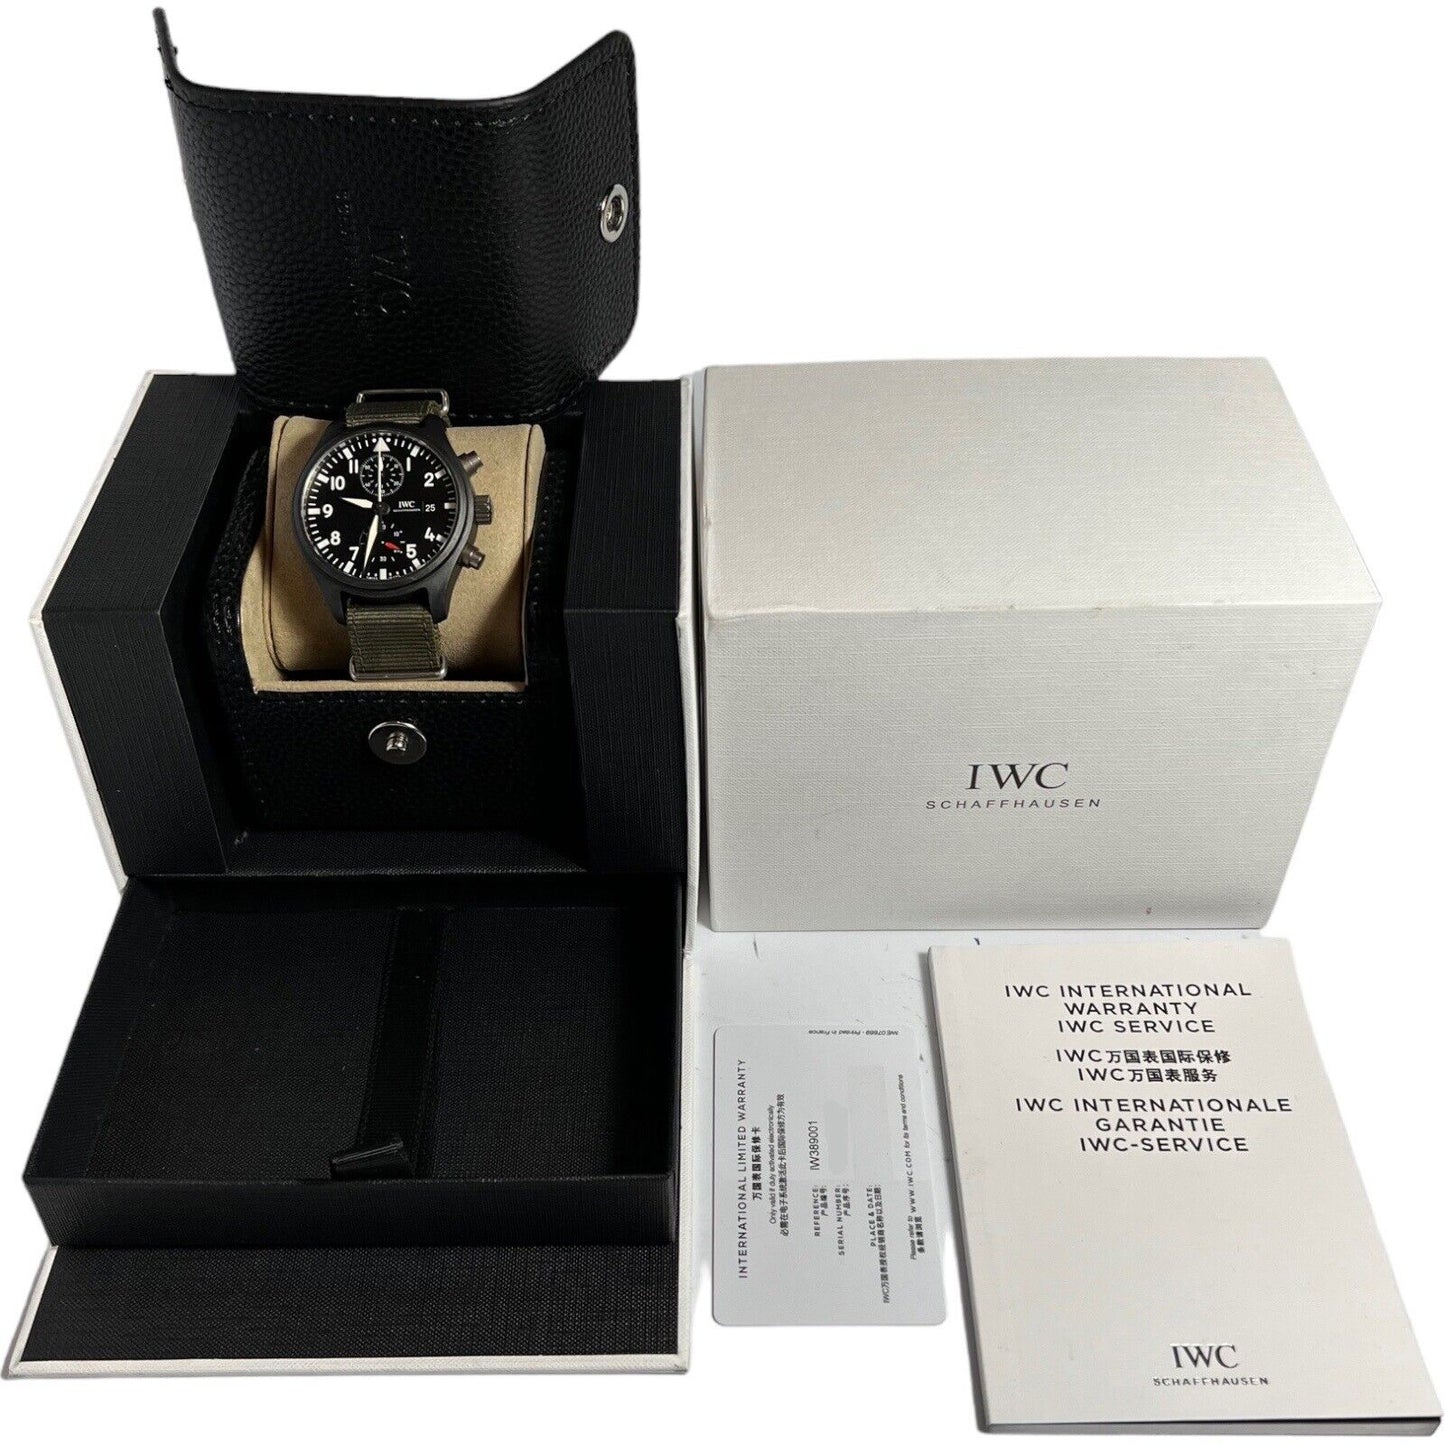 IWC Pilot Automatic Ceramic Watch Chronograph Top Gun IW389001 Box And Papers